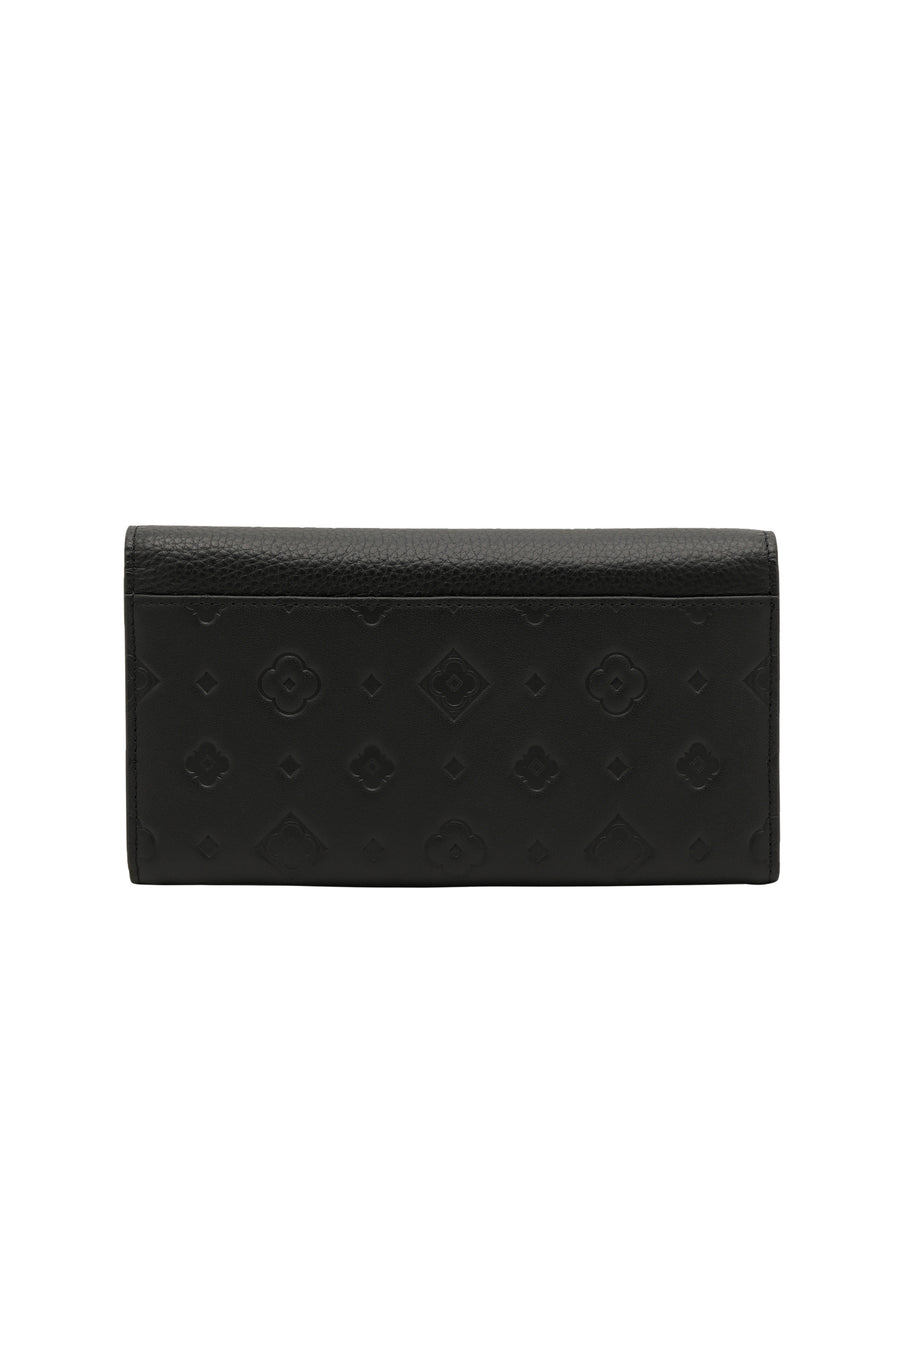 Giovanna's Leather Wallet - Pitch Black